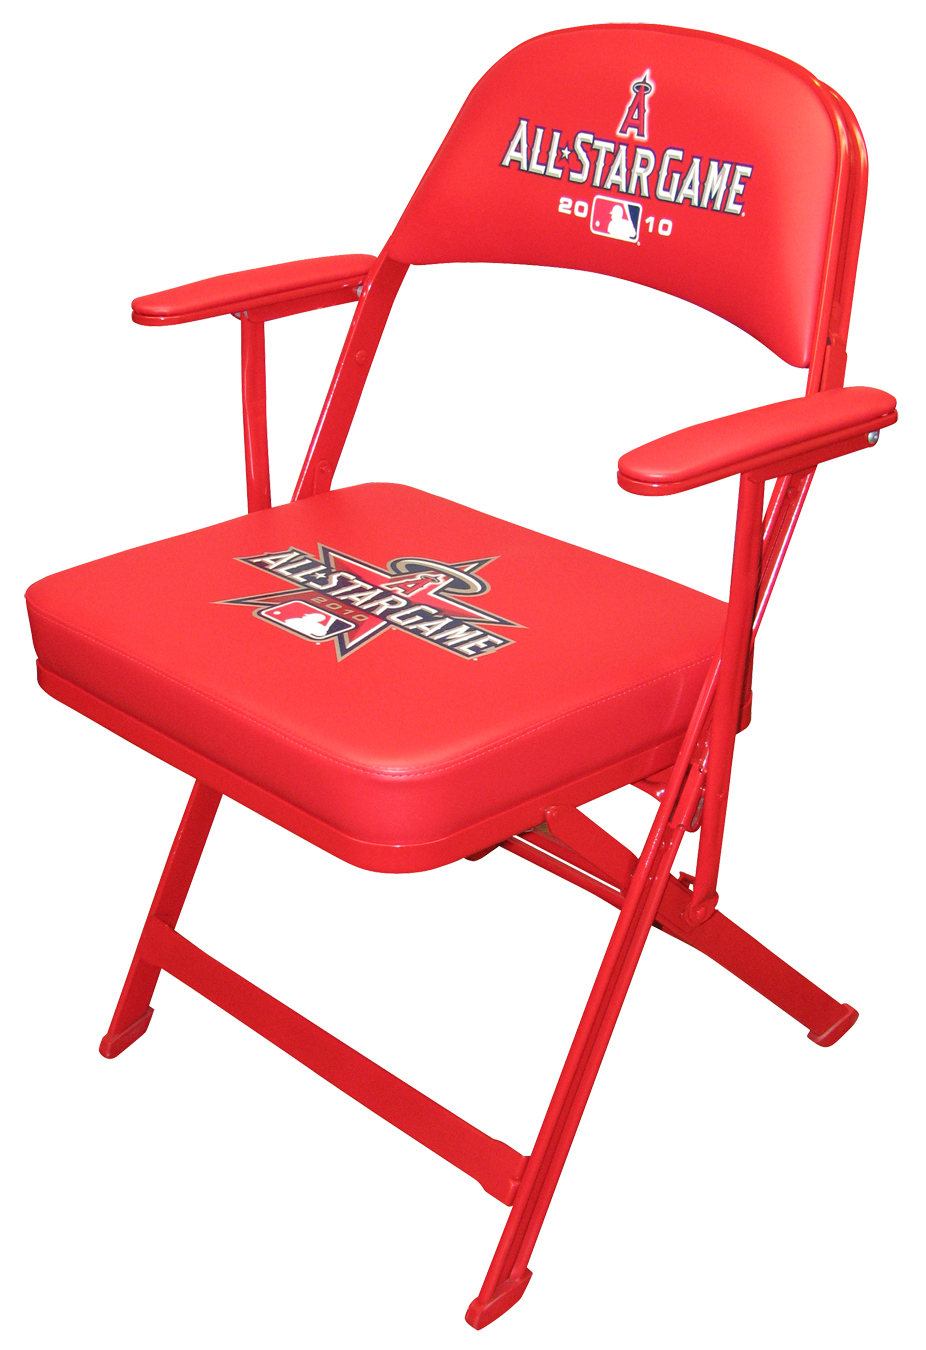 Screen Printed Chairs